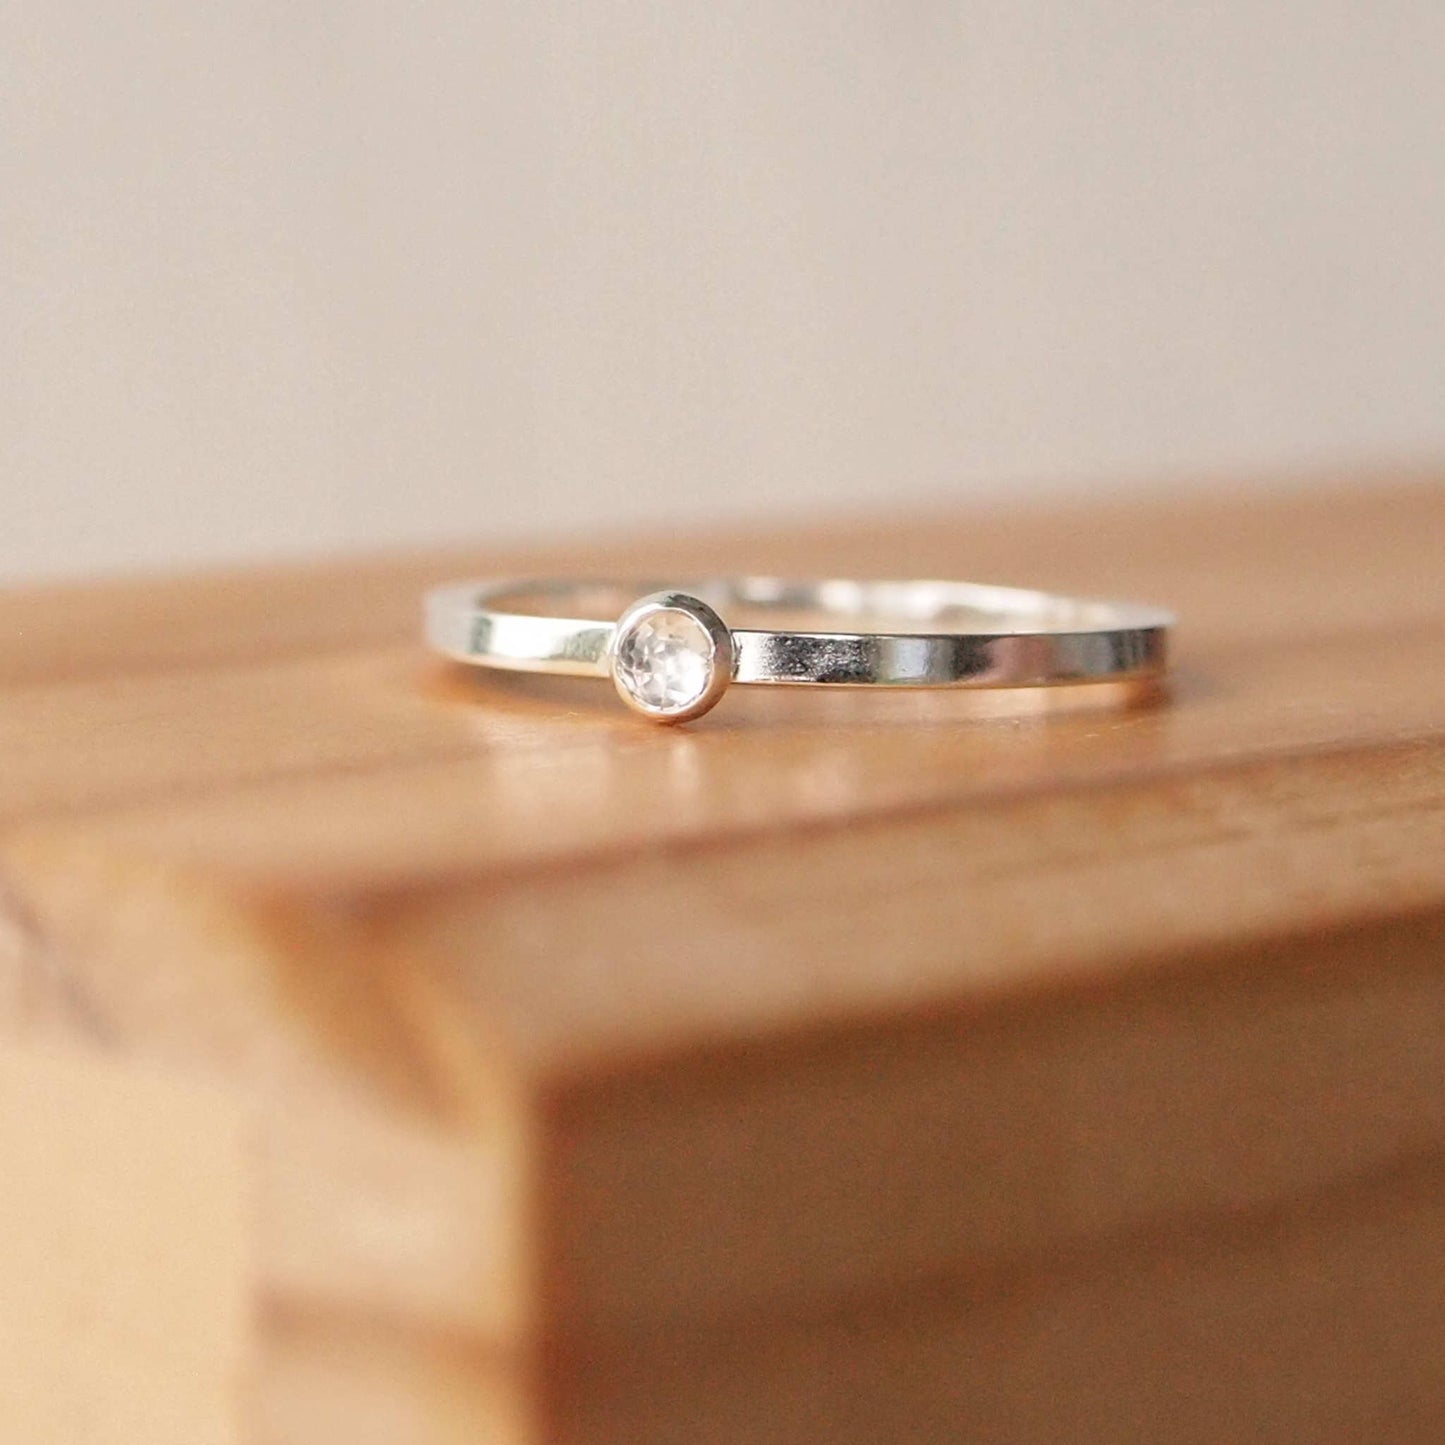 Simple Clear gemstone sparkly gemstone ring in sterling silver with a modern square band with a 3mm sized round White topaz faceted Cabochon. Handmade in Edinburgh by Maram Jewellery